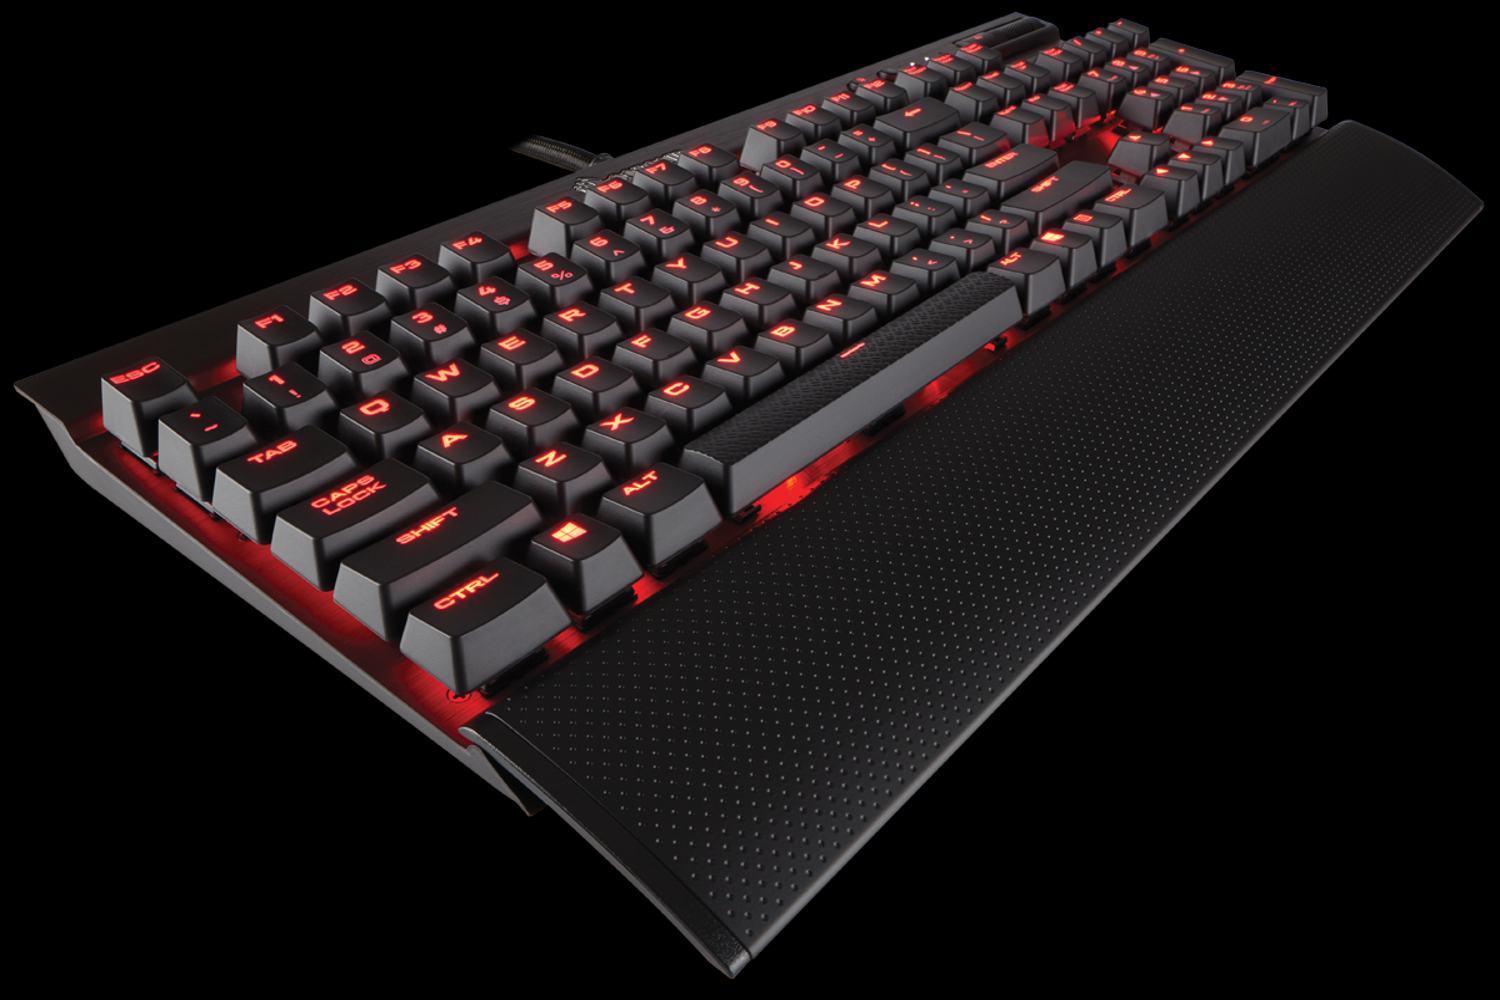 corsair launches lux mechanical keyboards pc gaming k70